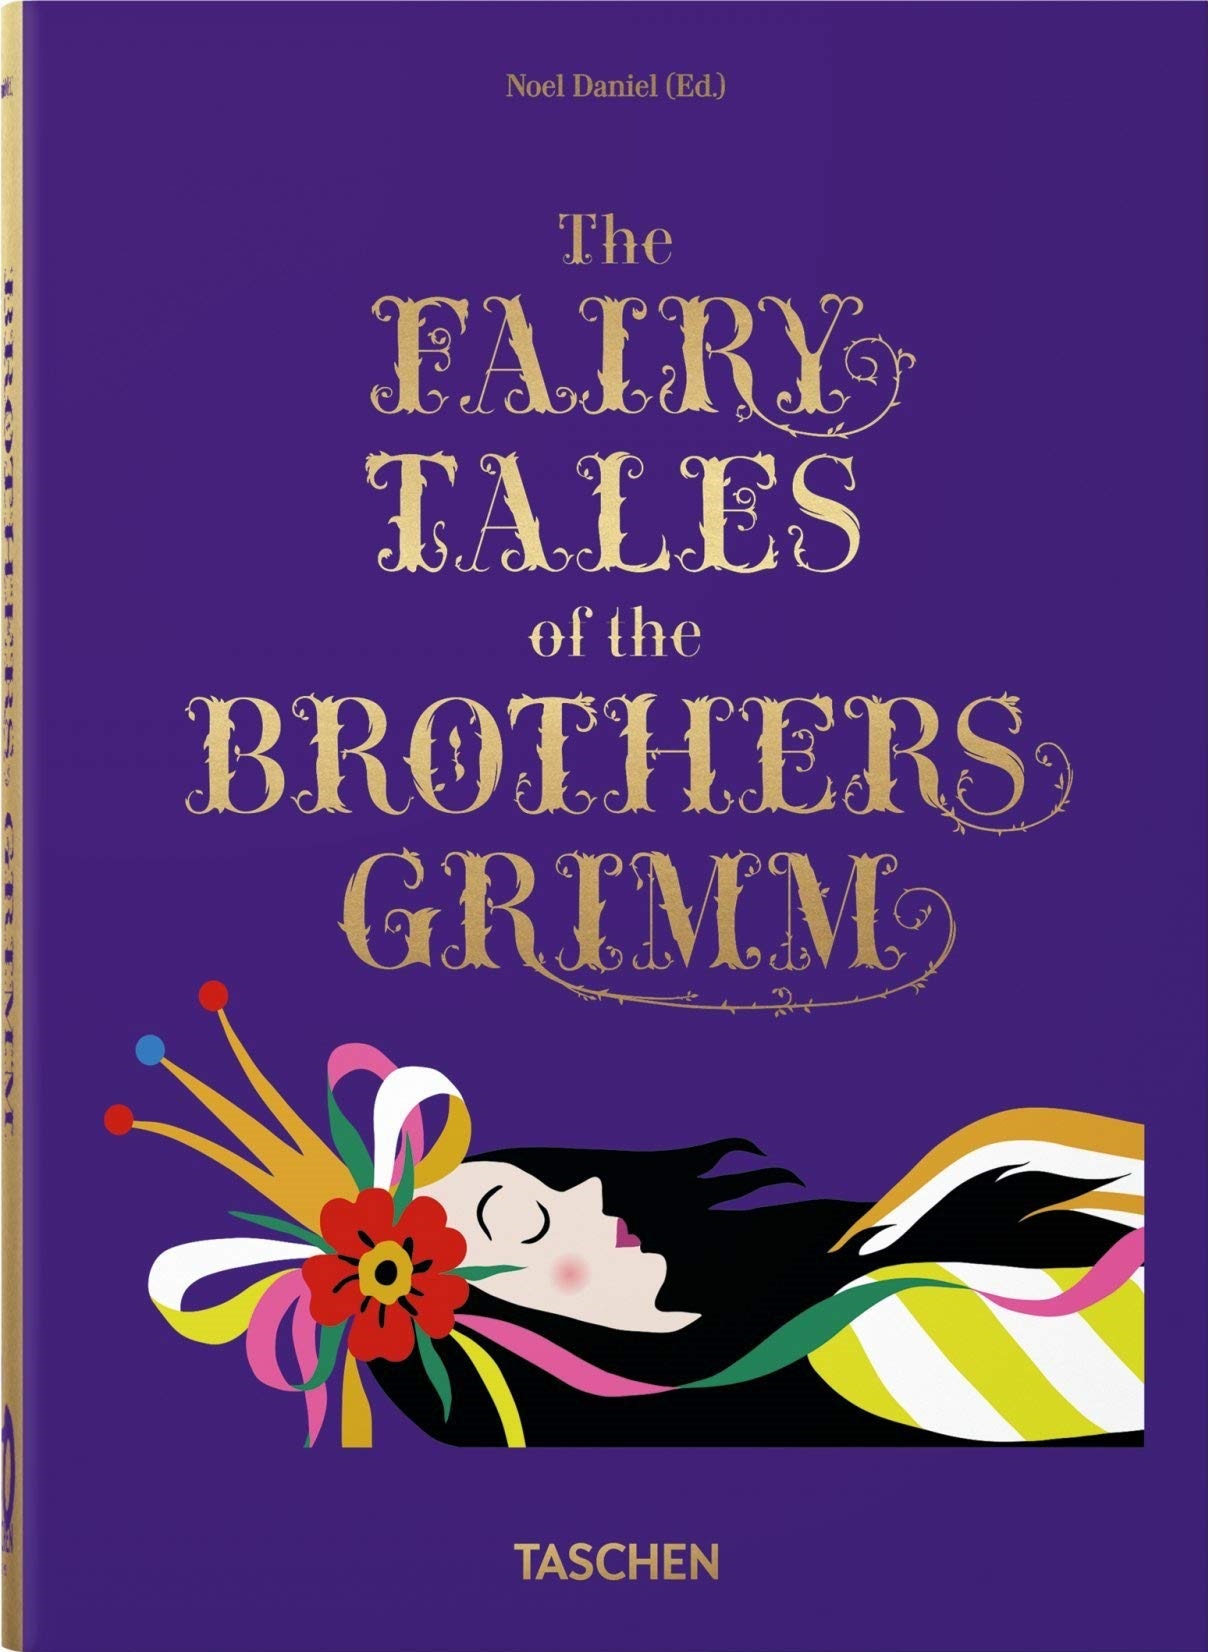 The Fairy Tales of the Brothers Grimm. The Fairy Tales of Hans Christian Andersen